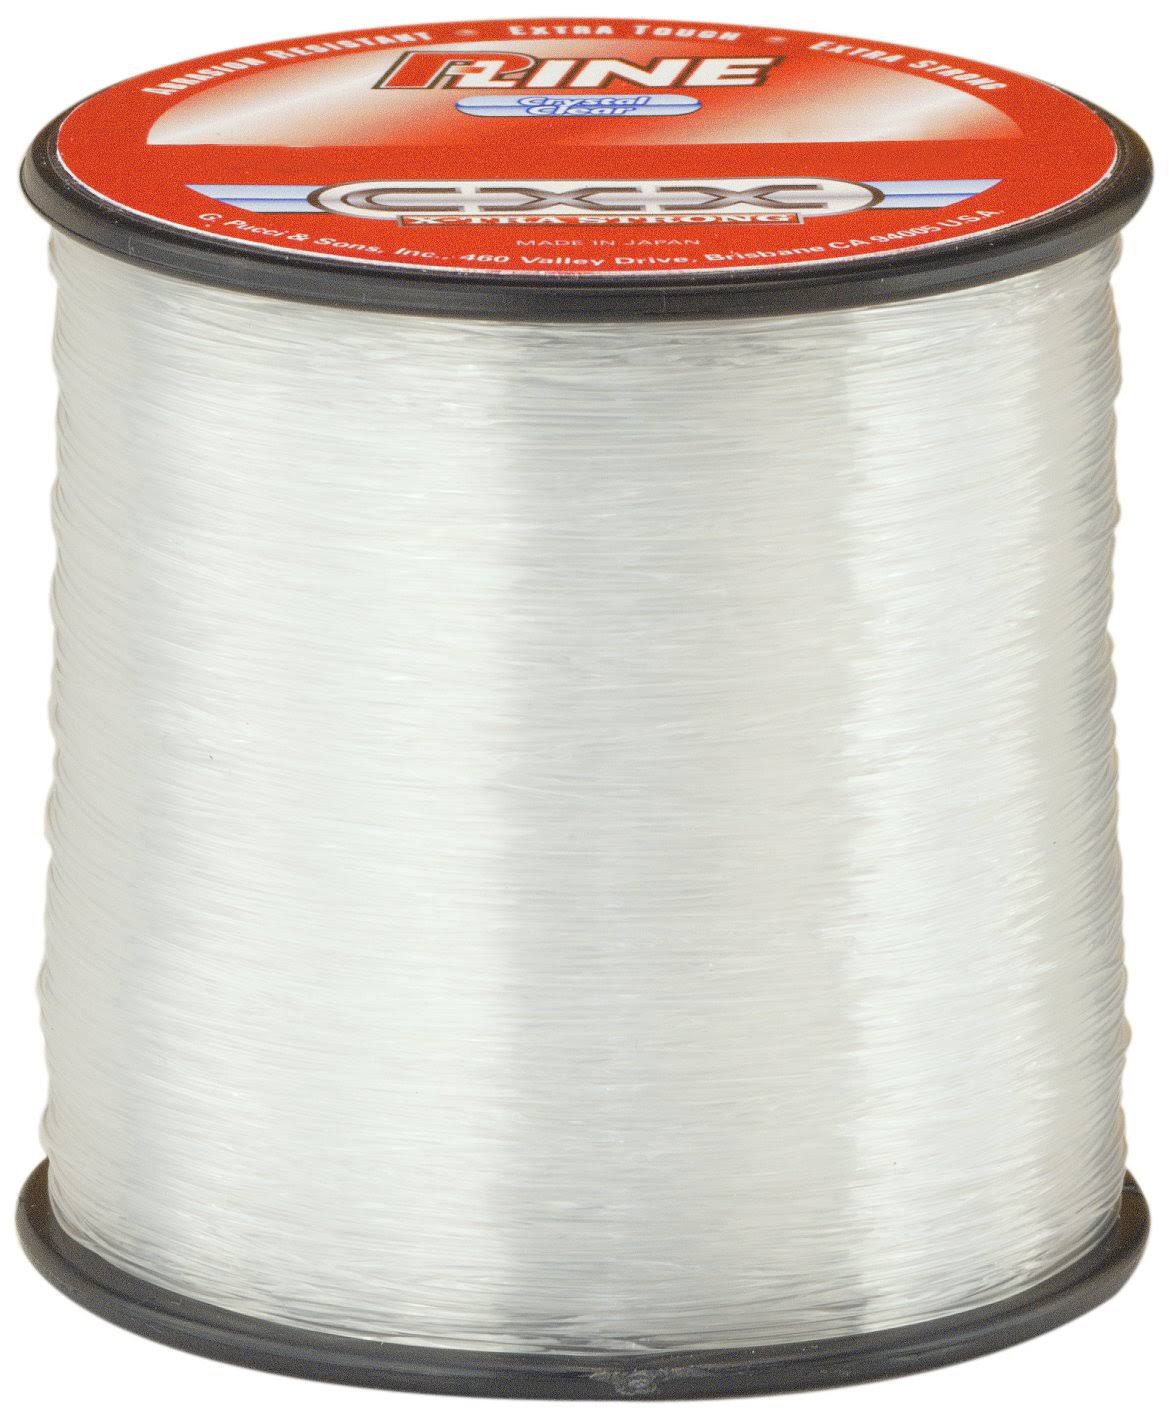 P Line CXX Xtra Strong Fishing Spool - Crystal Clear, 400yds